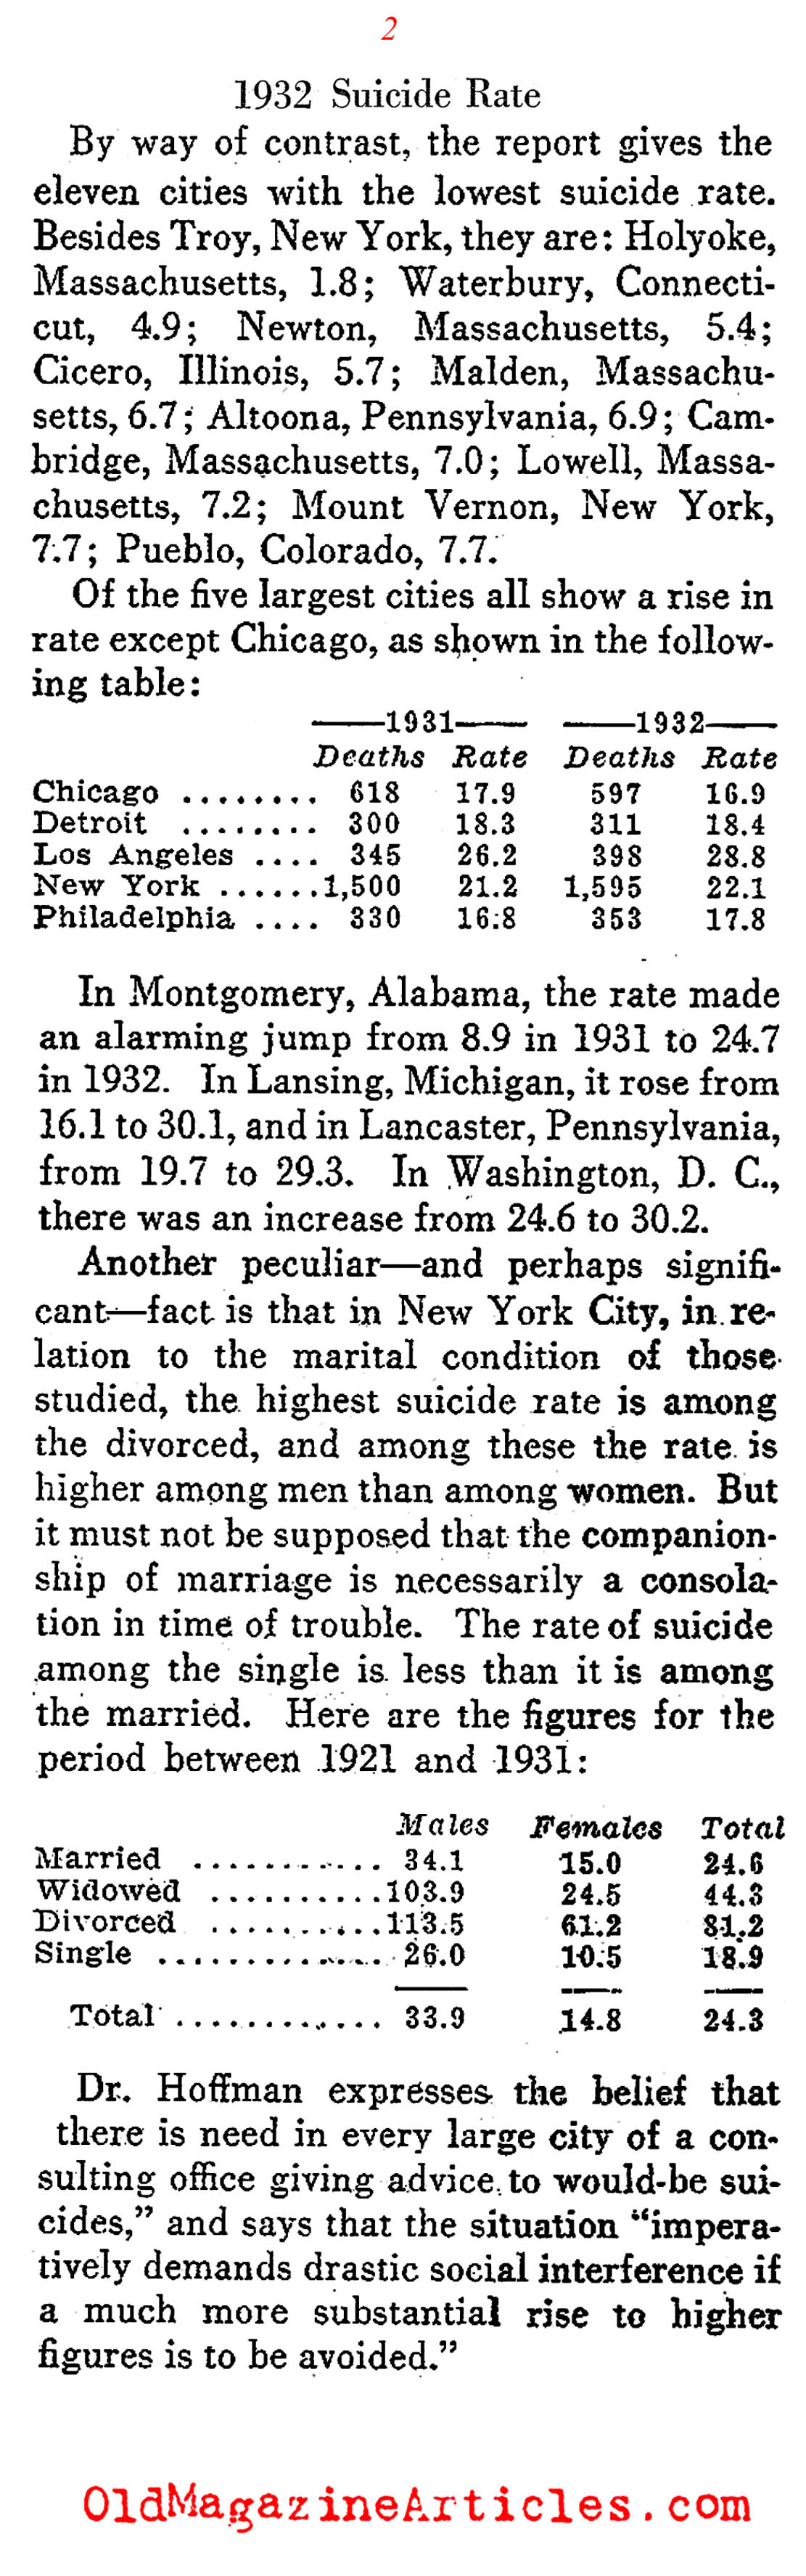 The Increased Suicide Rate (Literary Digest, 1933)